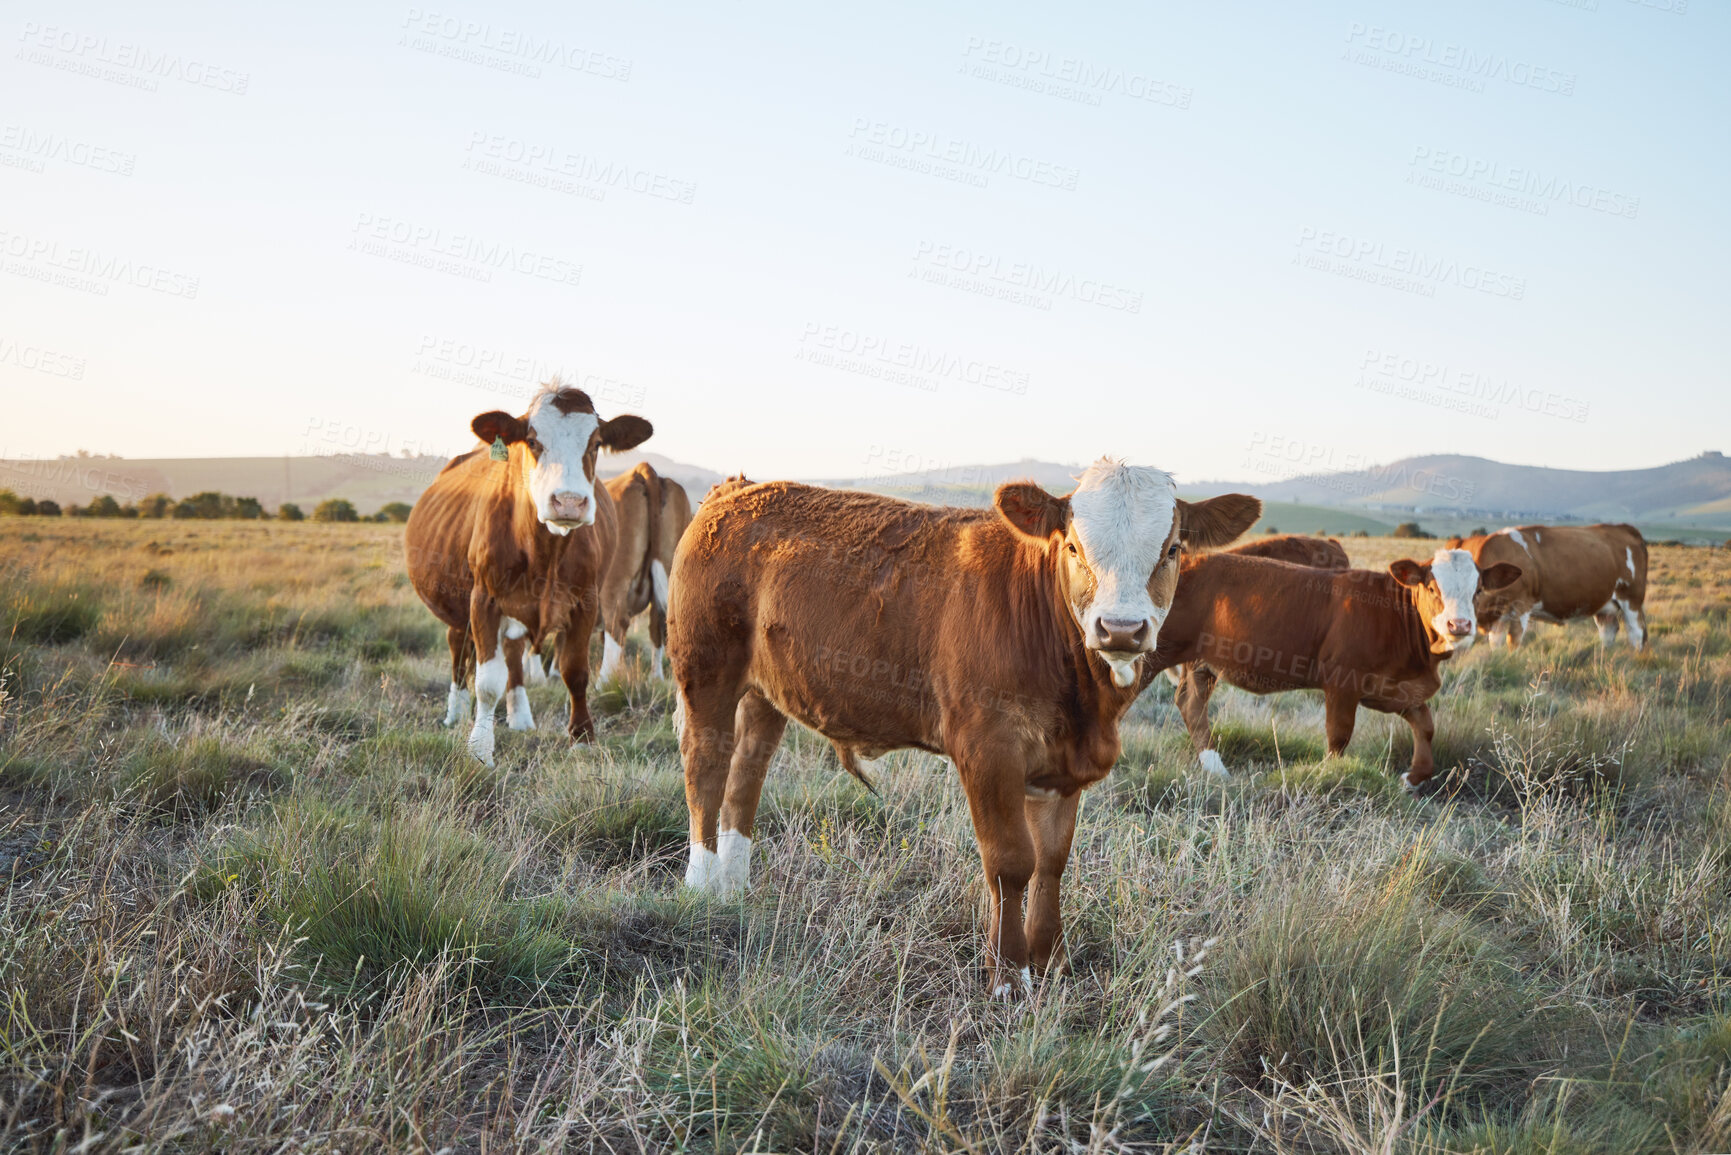 Buy stock photo Sustainable, live stock and cows on a farm in the countryside for eco friendly environment. Agriculture, animals and herd of cattle for meat or dairy or beef trade production industry in grass field.